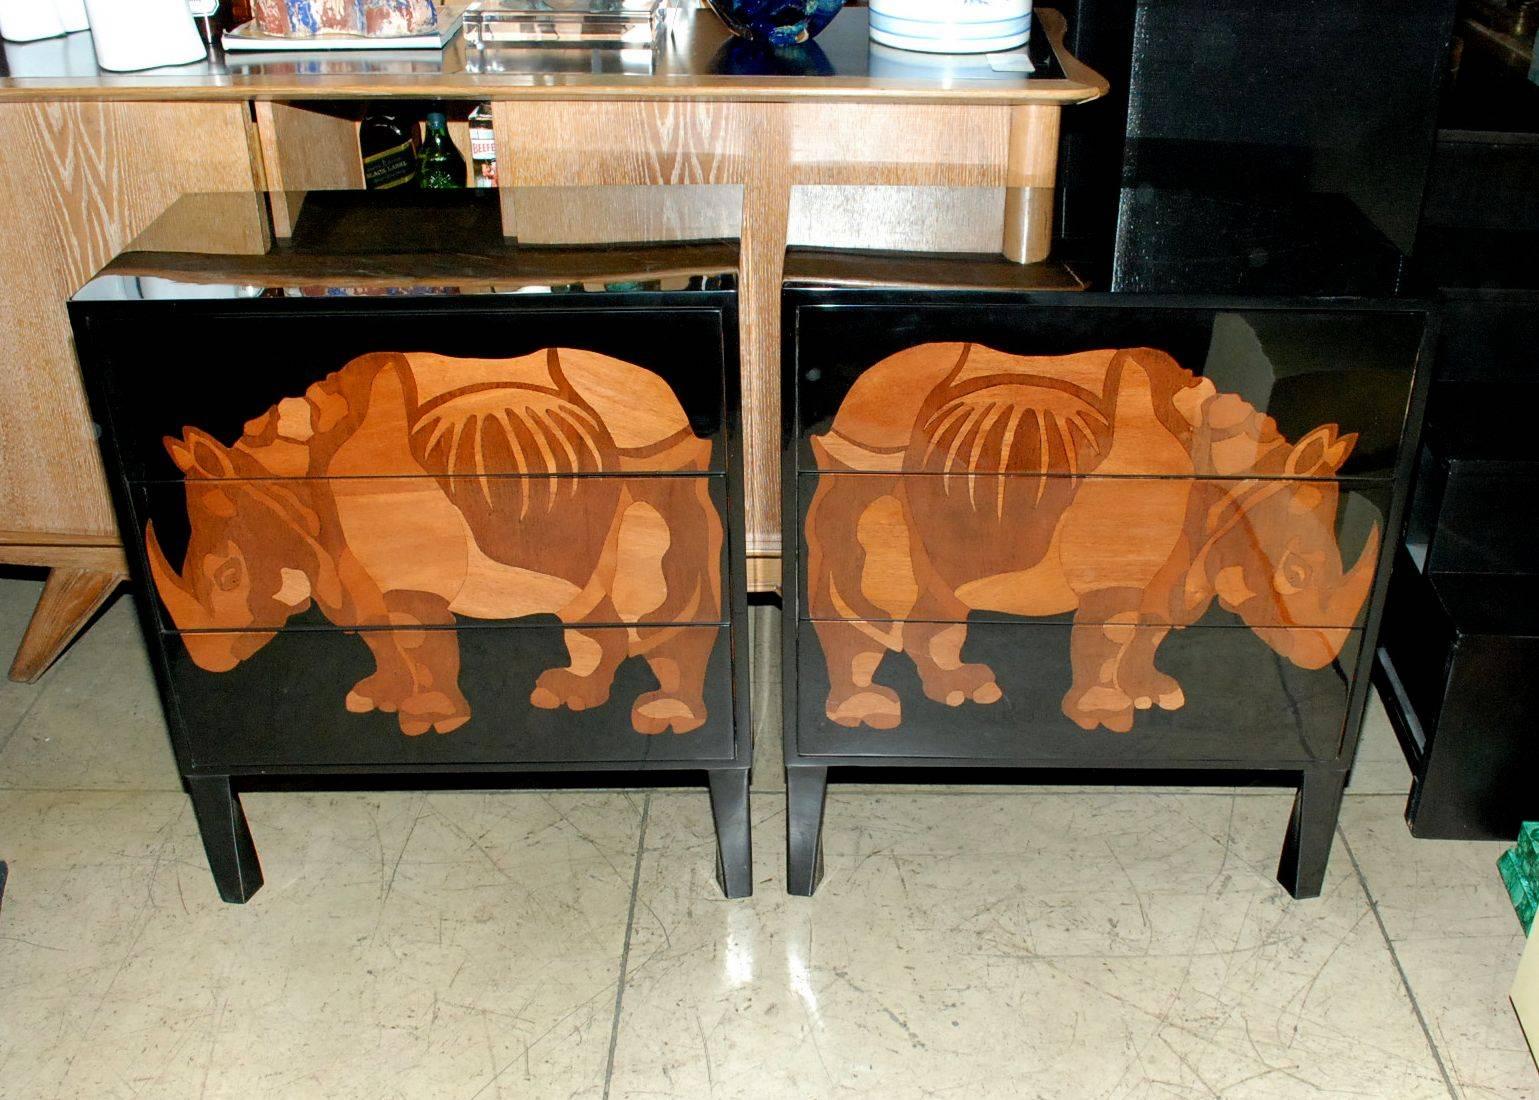 A great pair of black lacquered commodes with wood inlay rhino design (right and left). Each chest has three drawers.